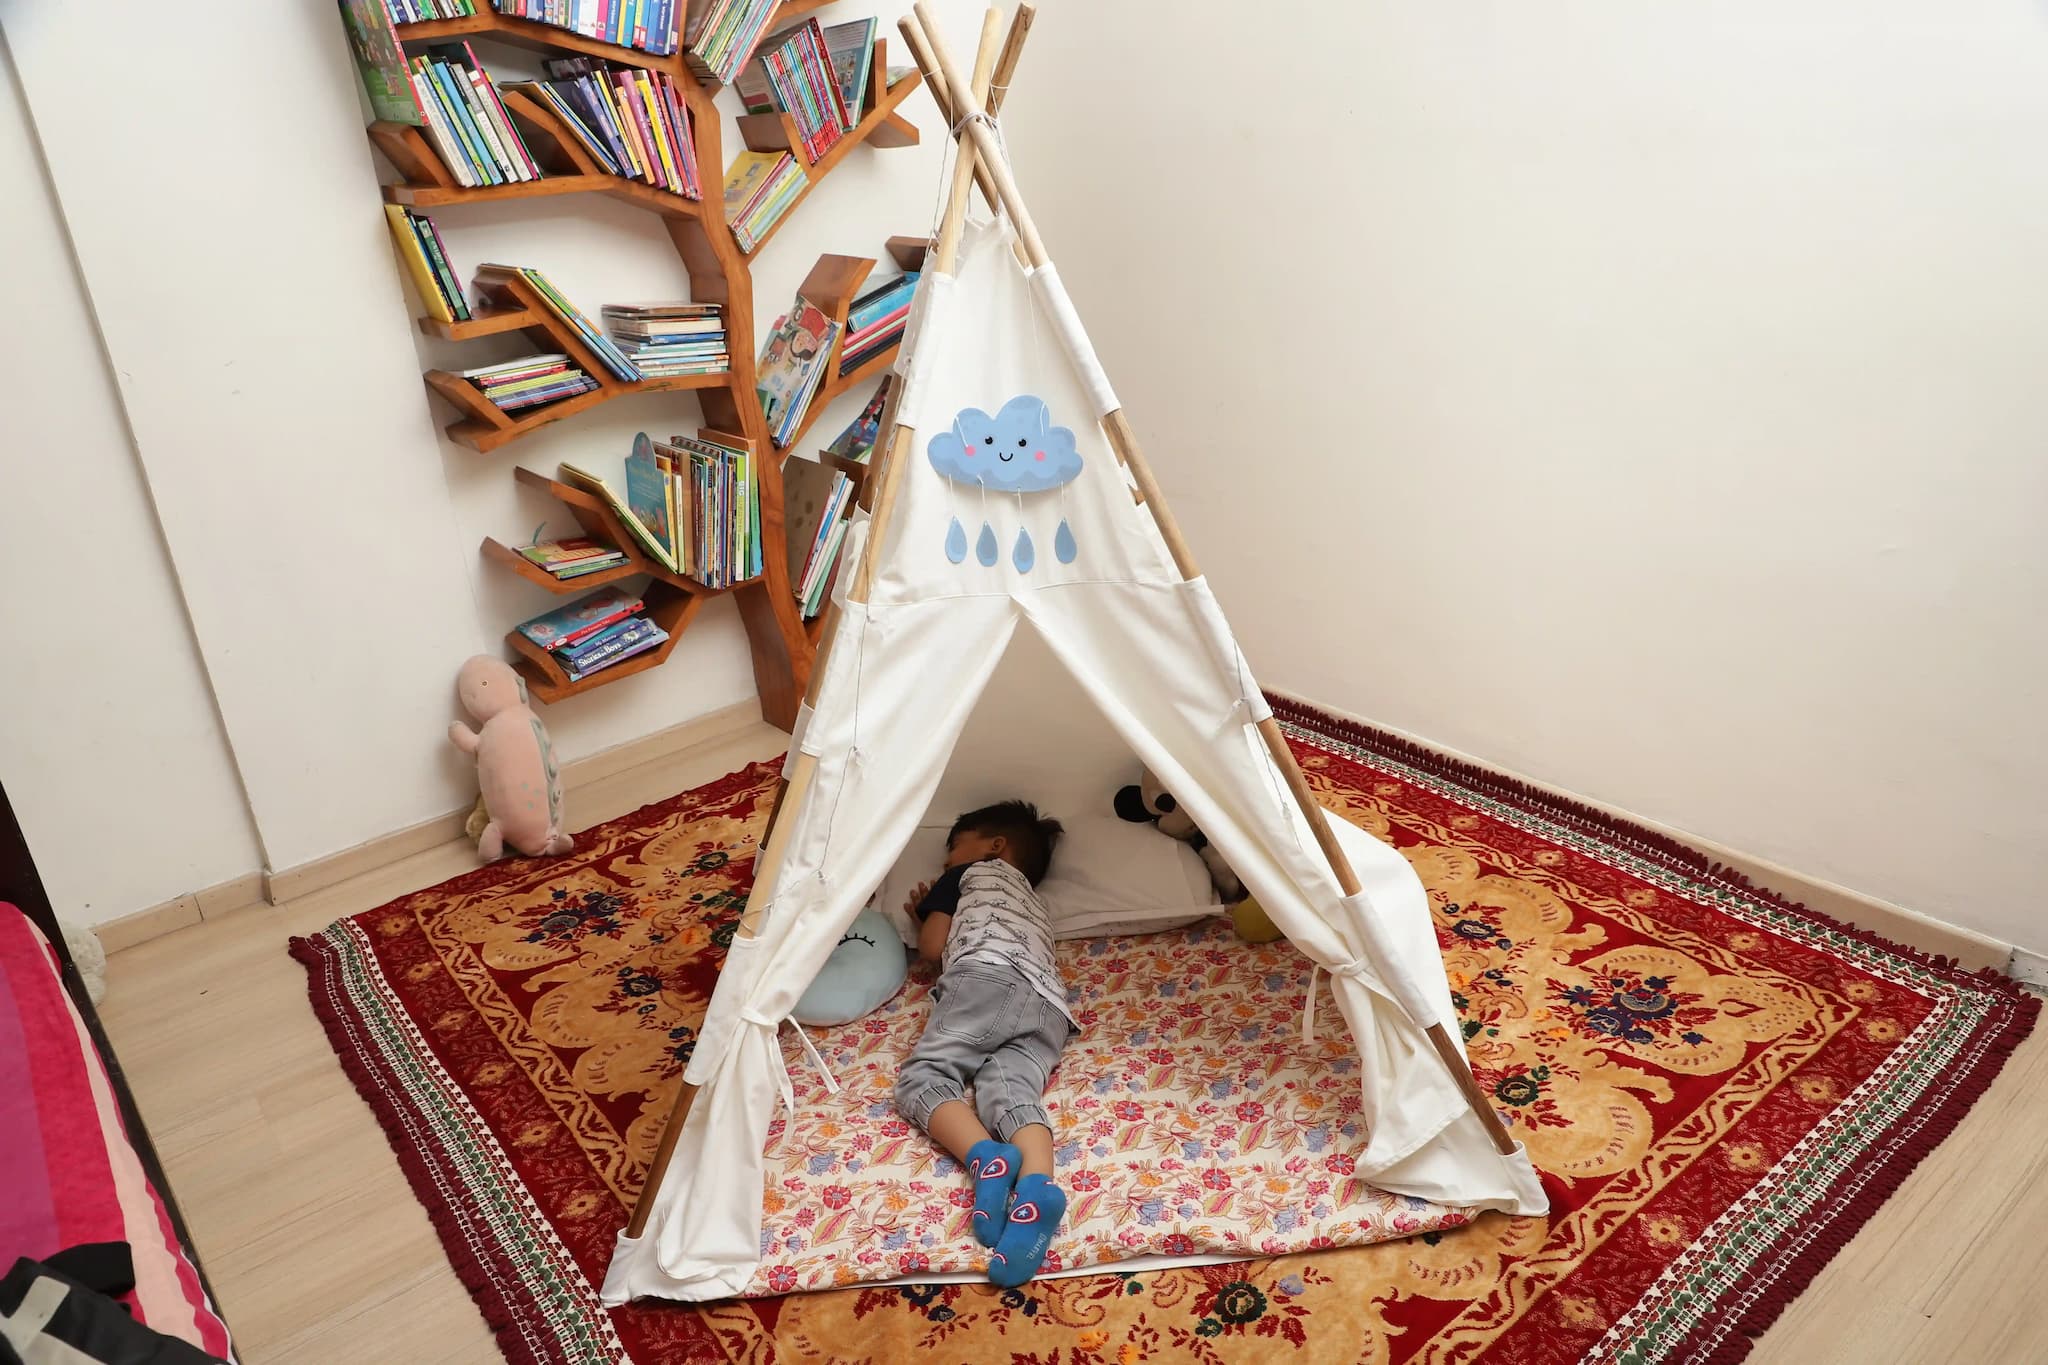 100% Cotton Canvas Play DIY Kit Tent House For Kids - White